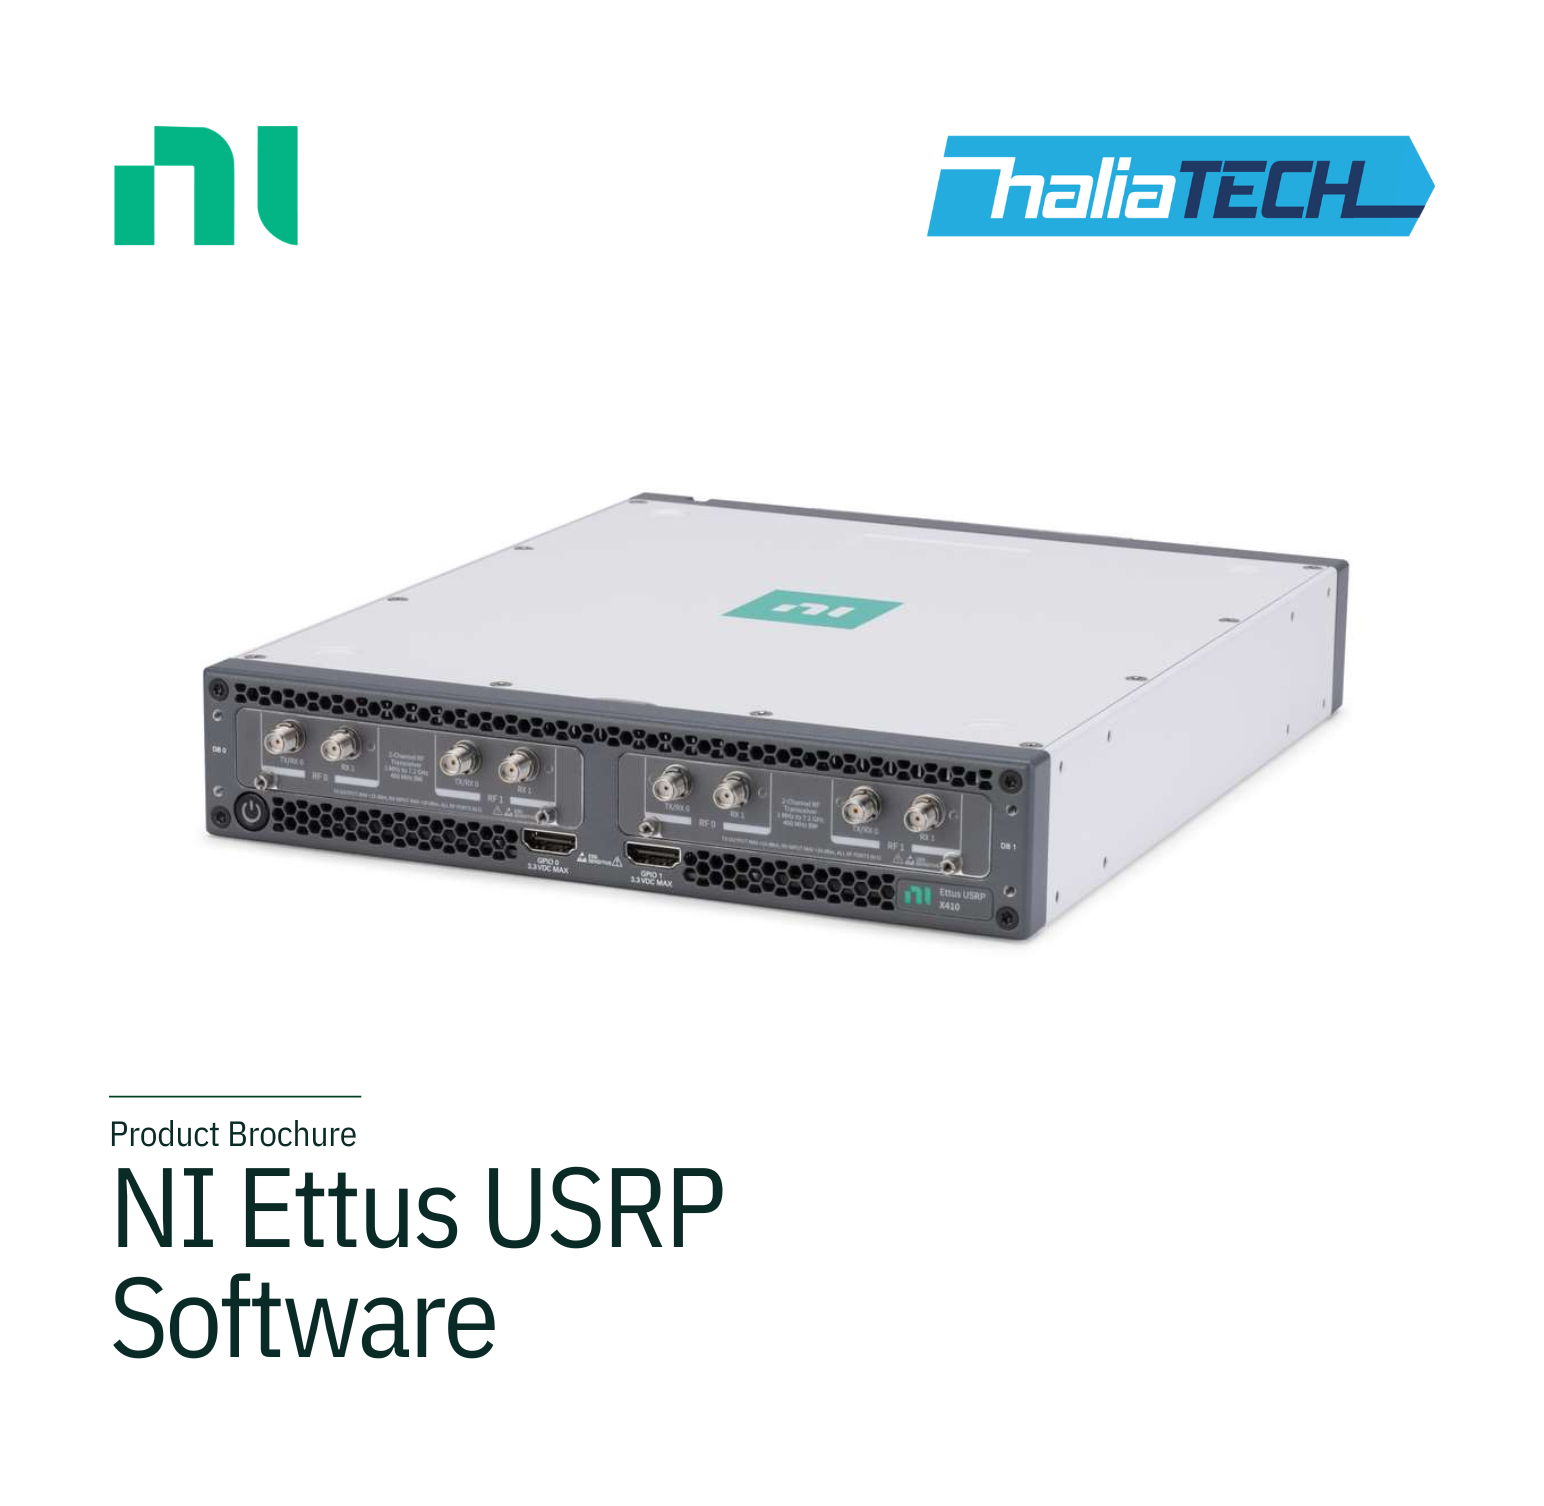 Unlock the Power of Next-Gen Wireless with NI USRP Software Defined Radio